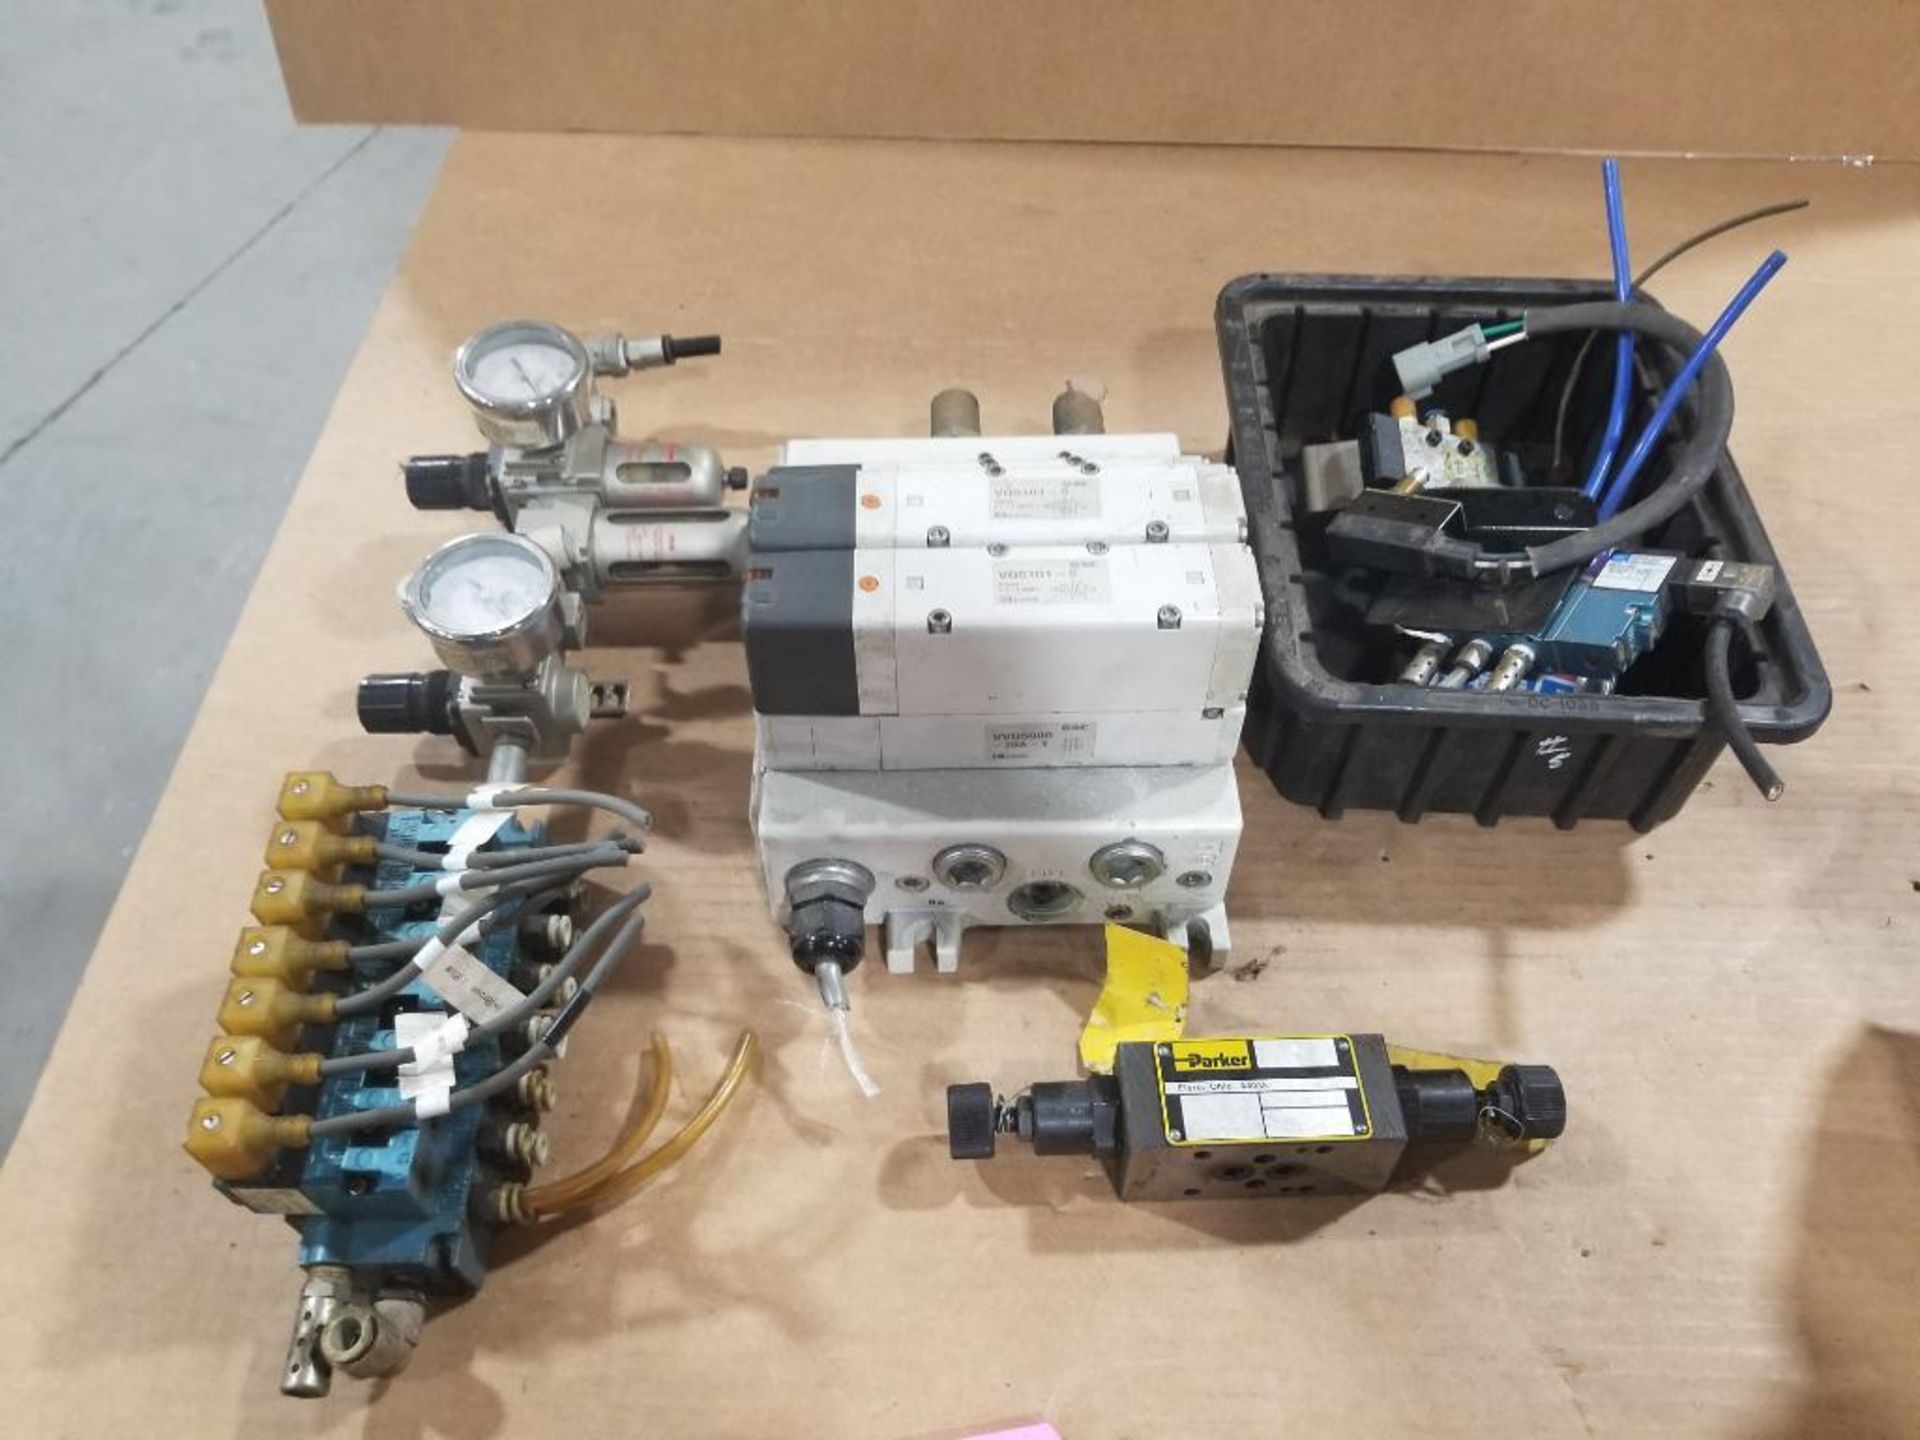 Assorted pneumatic valves and parts.